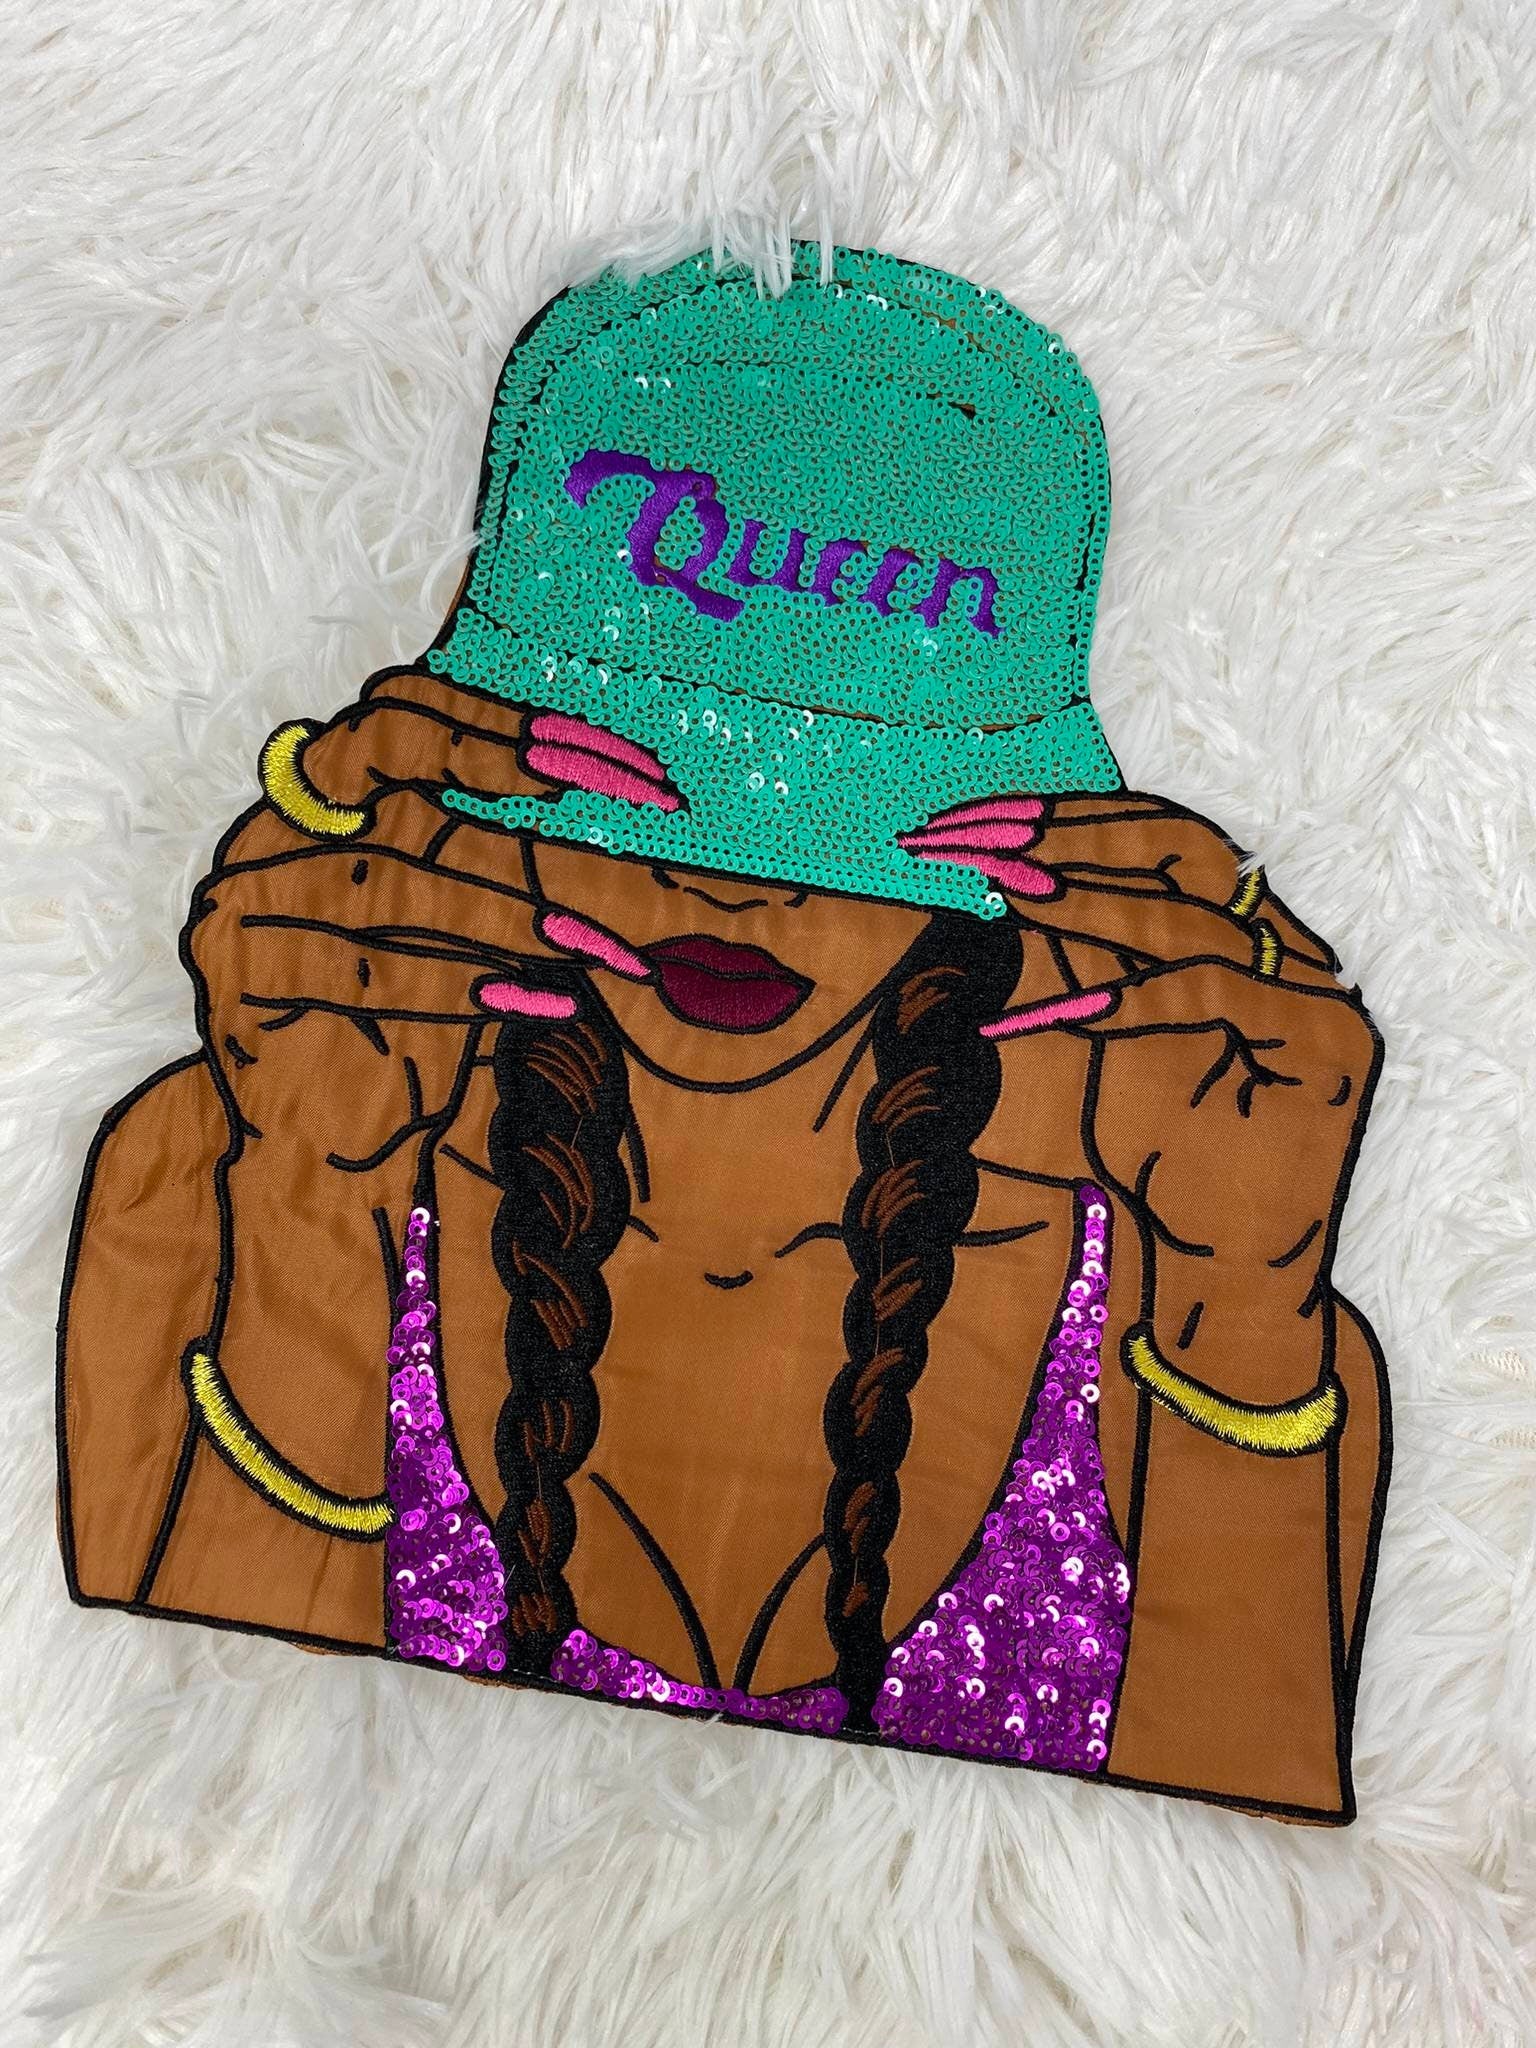 Exclusive, 1-pc SEQUINS "Queen" w/Teal Hat, Embroidery, & Satin, 10'' Patch, Iron-on Applique, Large Back Patch, Patch for Clothing